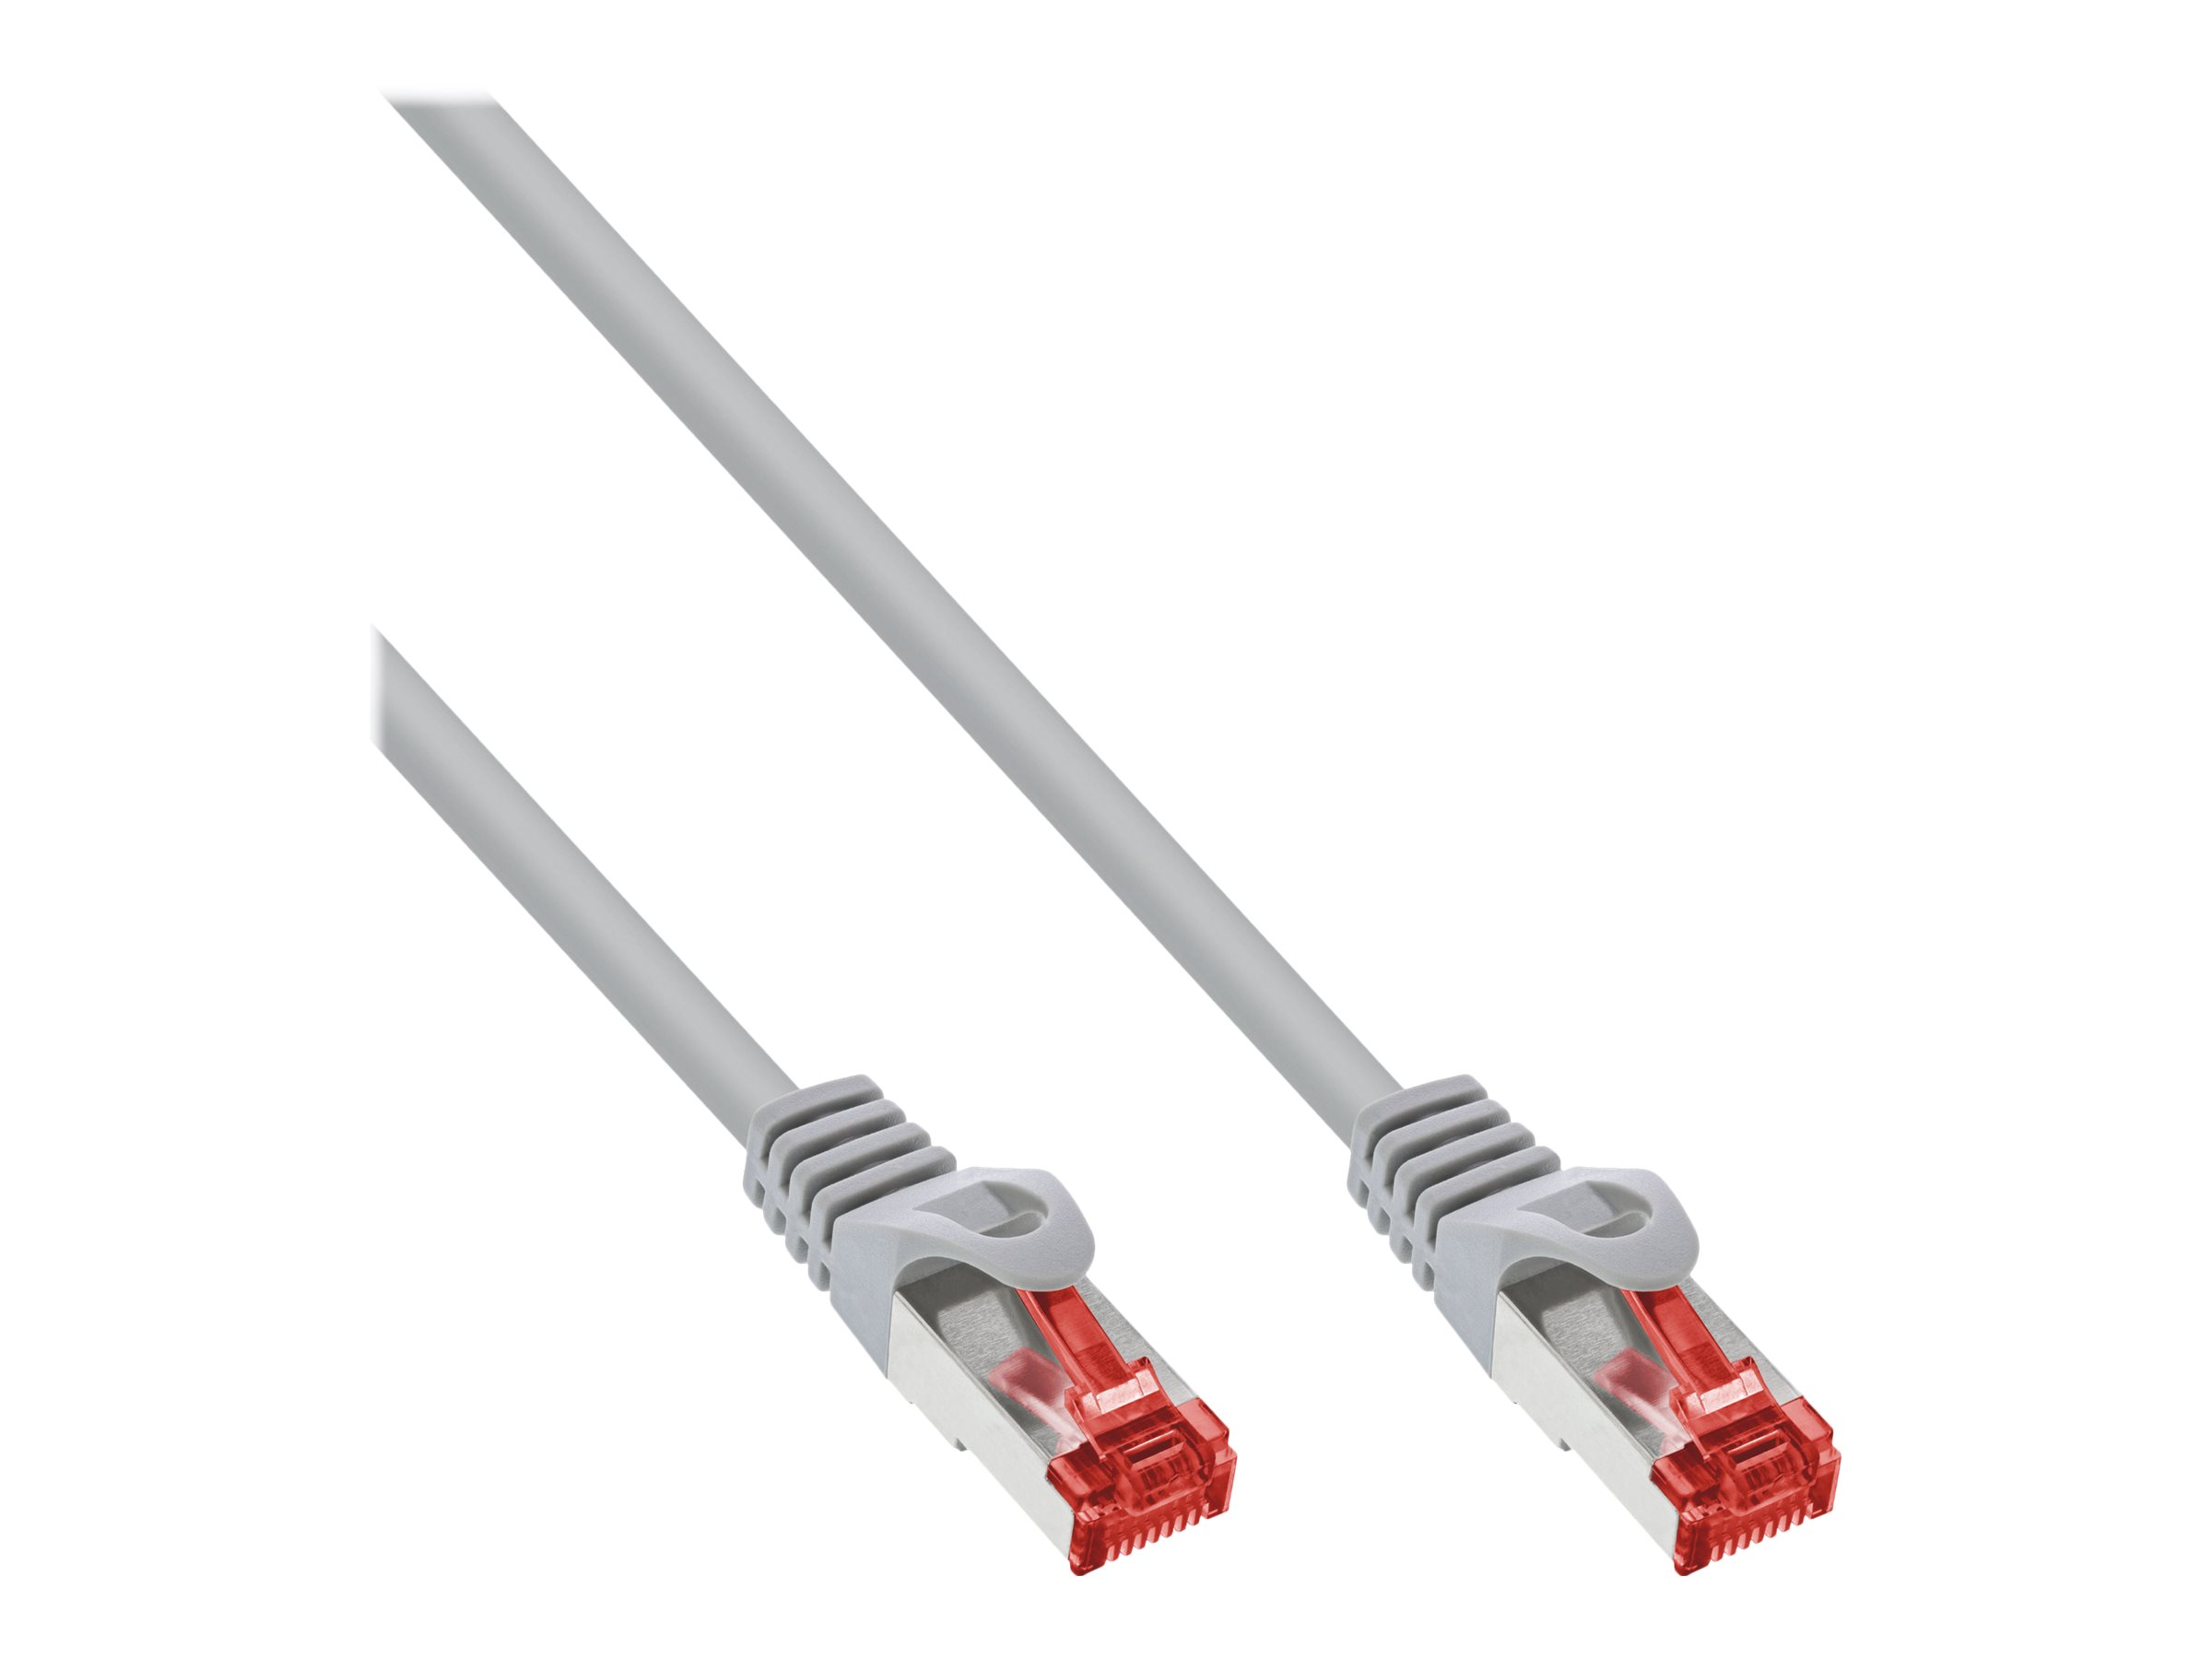 IT Cheap adapters shop the OCTO & online in AG cables